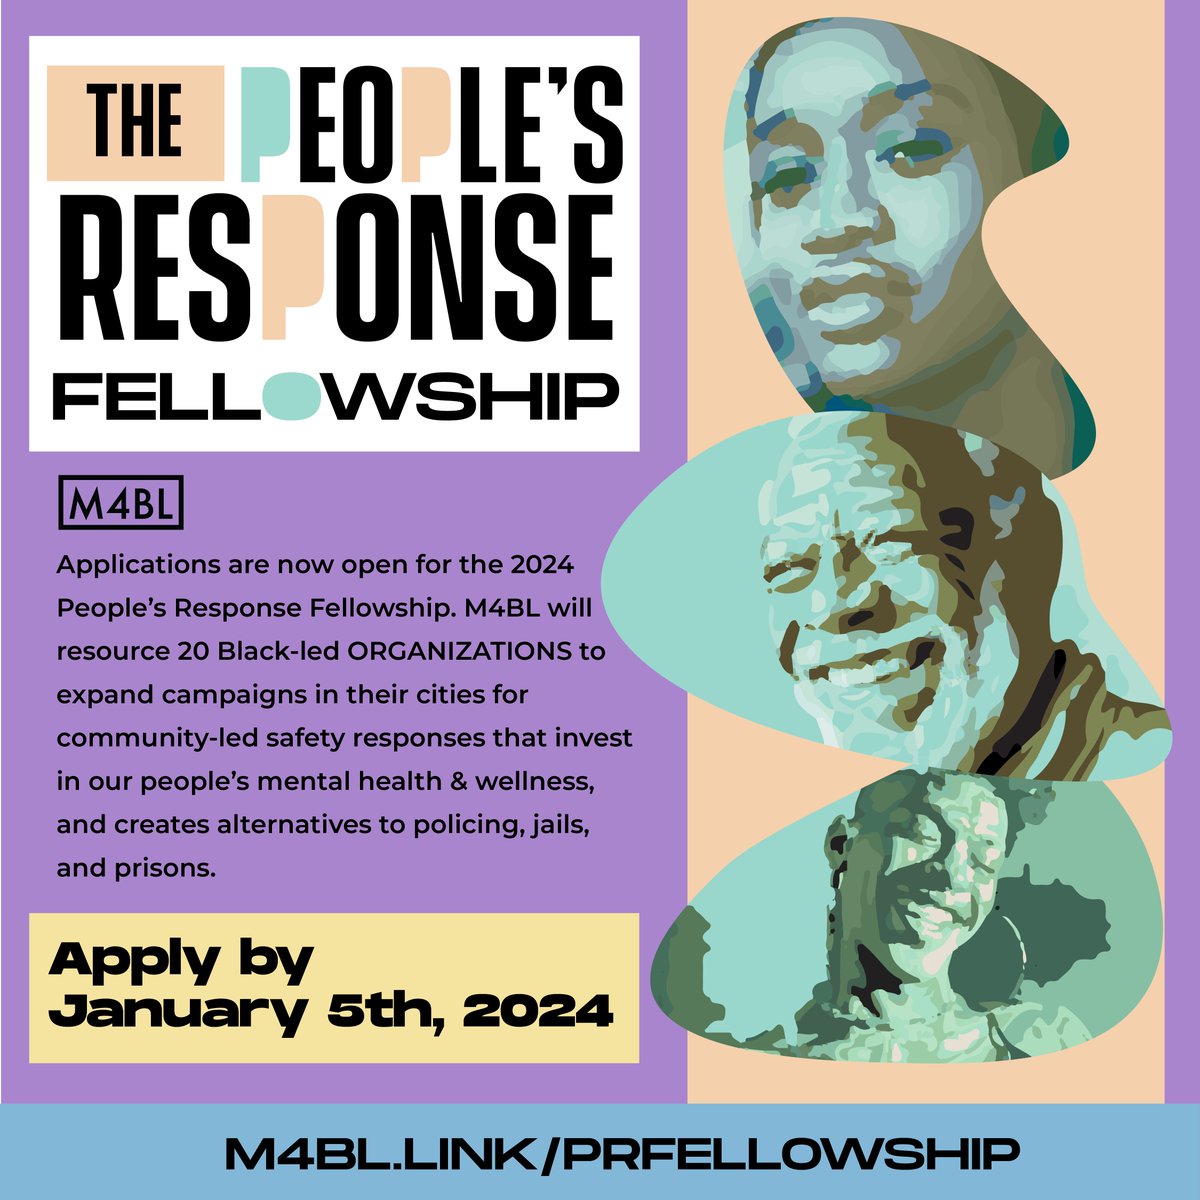 Organizing with your community? ✊🏾 M4BL launched the inaugural People’s Response Fellowship which awards over $75,000 to 20 Black-led Organizations that are expanding democracy and organizing for community-led public safety and response. Apply by 1/5 at: m4bl.link/CampaignFellow…